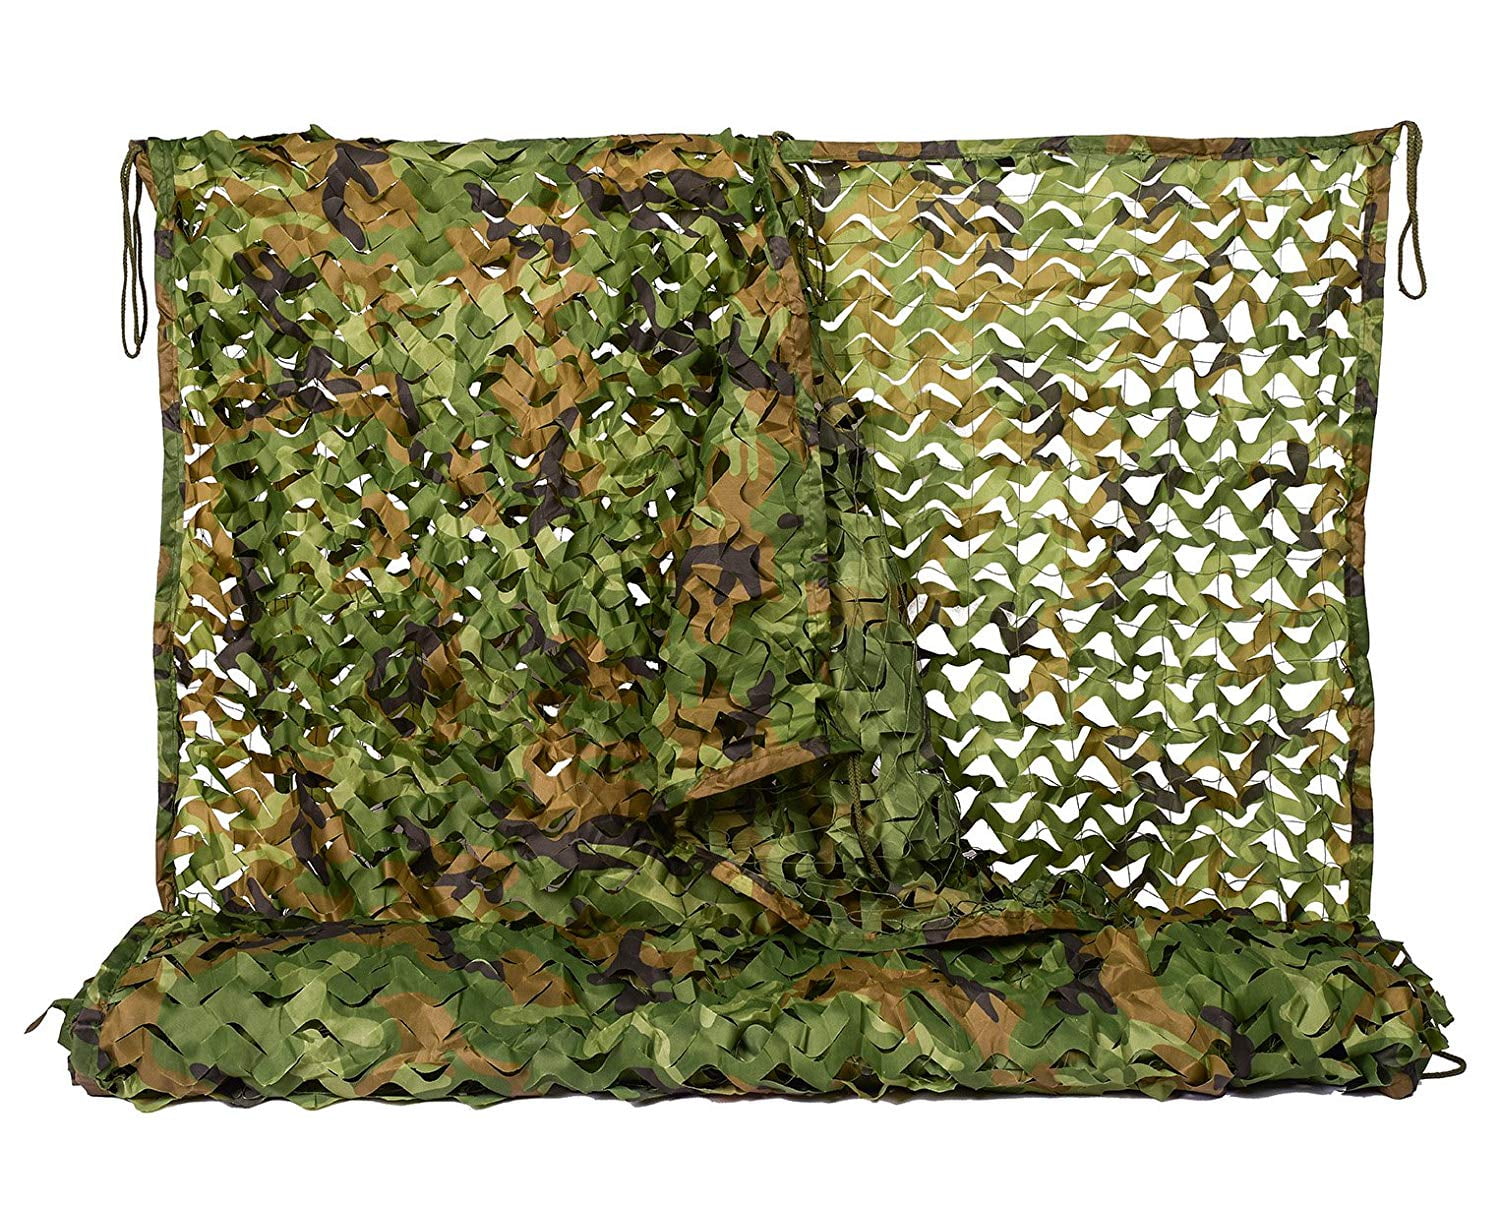 Camo Net Cover Netting Hunting Shooting Camping Army Hide Colors 